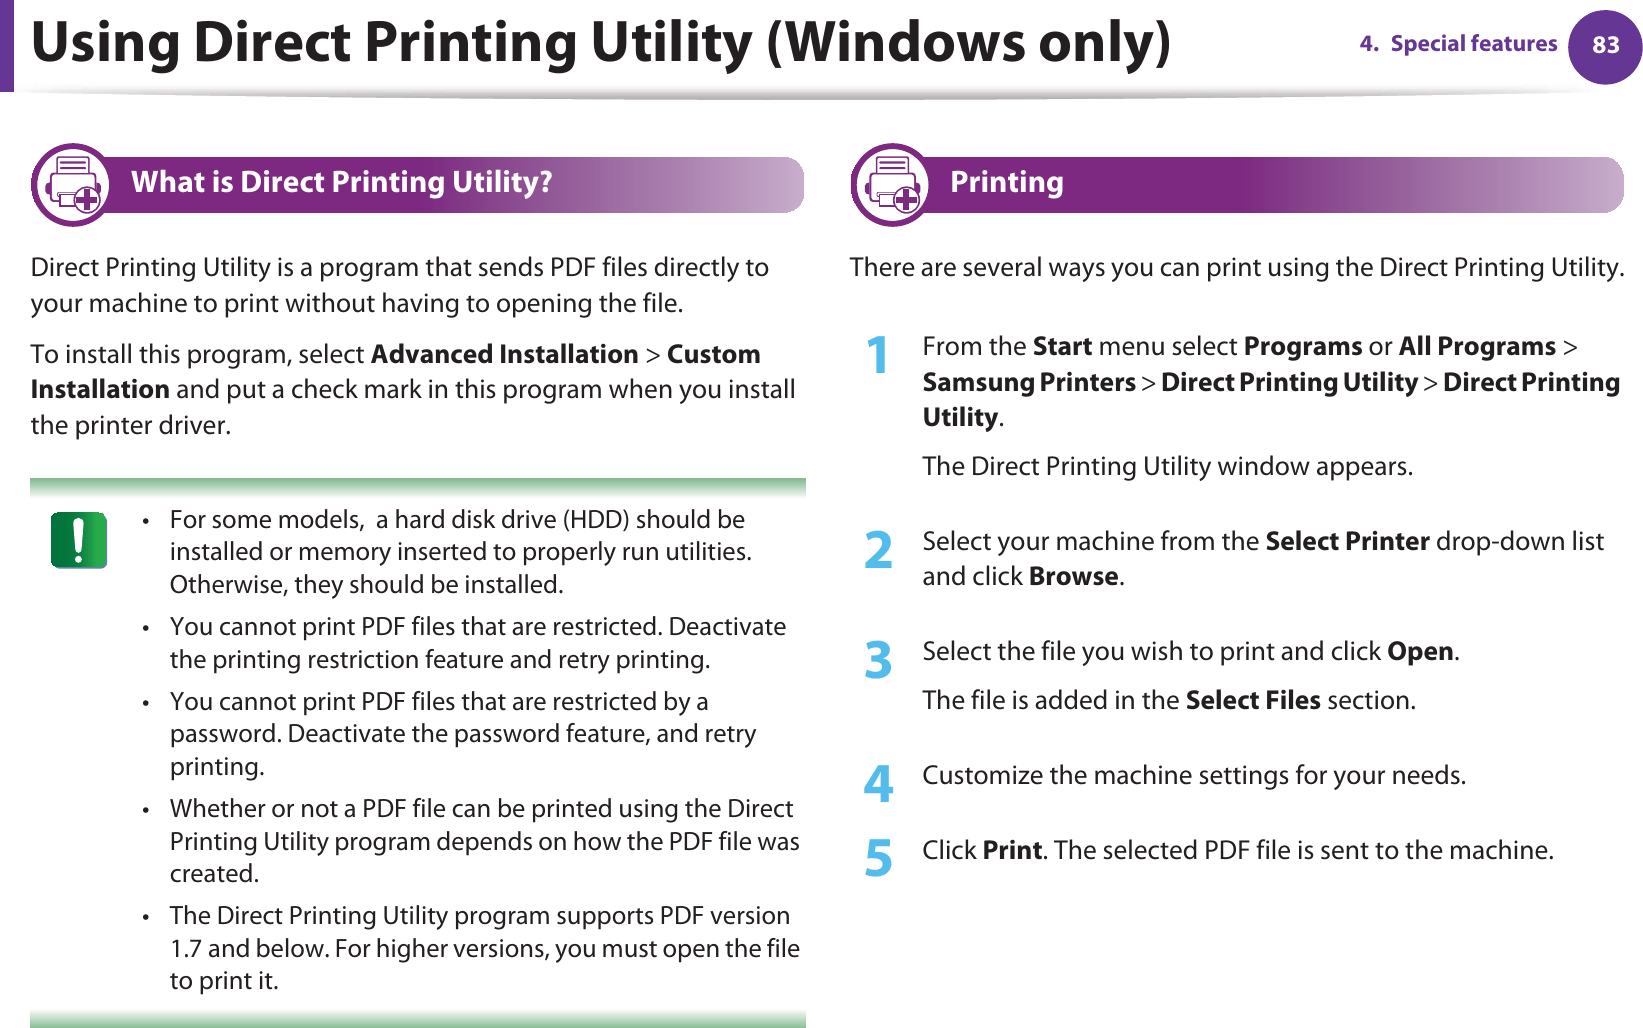 834. Special featuresUsing Direct Printing Utility (Windows only)3 What is Direct Printing Utility?Direct Printing Utility is a program that sends PDF files directly to your machine to print without having to opening the file.To install this program, select Advanced Installation &gt; Custom Installation and put a check mark in this program when you install the printer driver. • For some models,  a hard disk drive (HDD) should be installed or memory inserted to properly run utilities. Otherwise, they should be installed.• You cannot print PDF files that are restricted. Deactivate the printing restriction feature and retry printing.• You cannot print PDF files that are restricted by a password. Deactivate the password feature, and retry printing.• Whether or not a PDF file can be printed using the Direct Printing Utility program depends on how the PDF file was created.• The Direct Printing Utility program supports PDF version 1.7 and below. For higher versions, you must open the file to print it. 4 PrintingThere are several ways you can print using the Direct Printing Utility.1From the Start menu select Programs or All Programs &gt; Samsung Printers &gt; Direct Printing Utility &gt; Direct Printing Utility.The Direct Printing Utility window appears.2  Select your machine from the Select Printer drop-down list and click Browse.3  Select the file you wish to print and click Open.The file is added in the Select Files section.4  Customize the machine settings for your needs. 5  Click Print. The selected PDF file is sent to the machine.